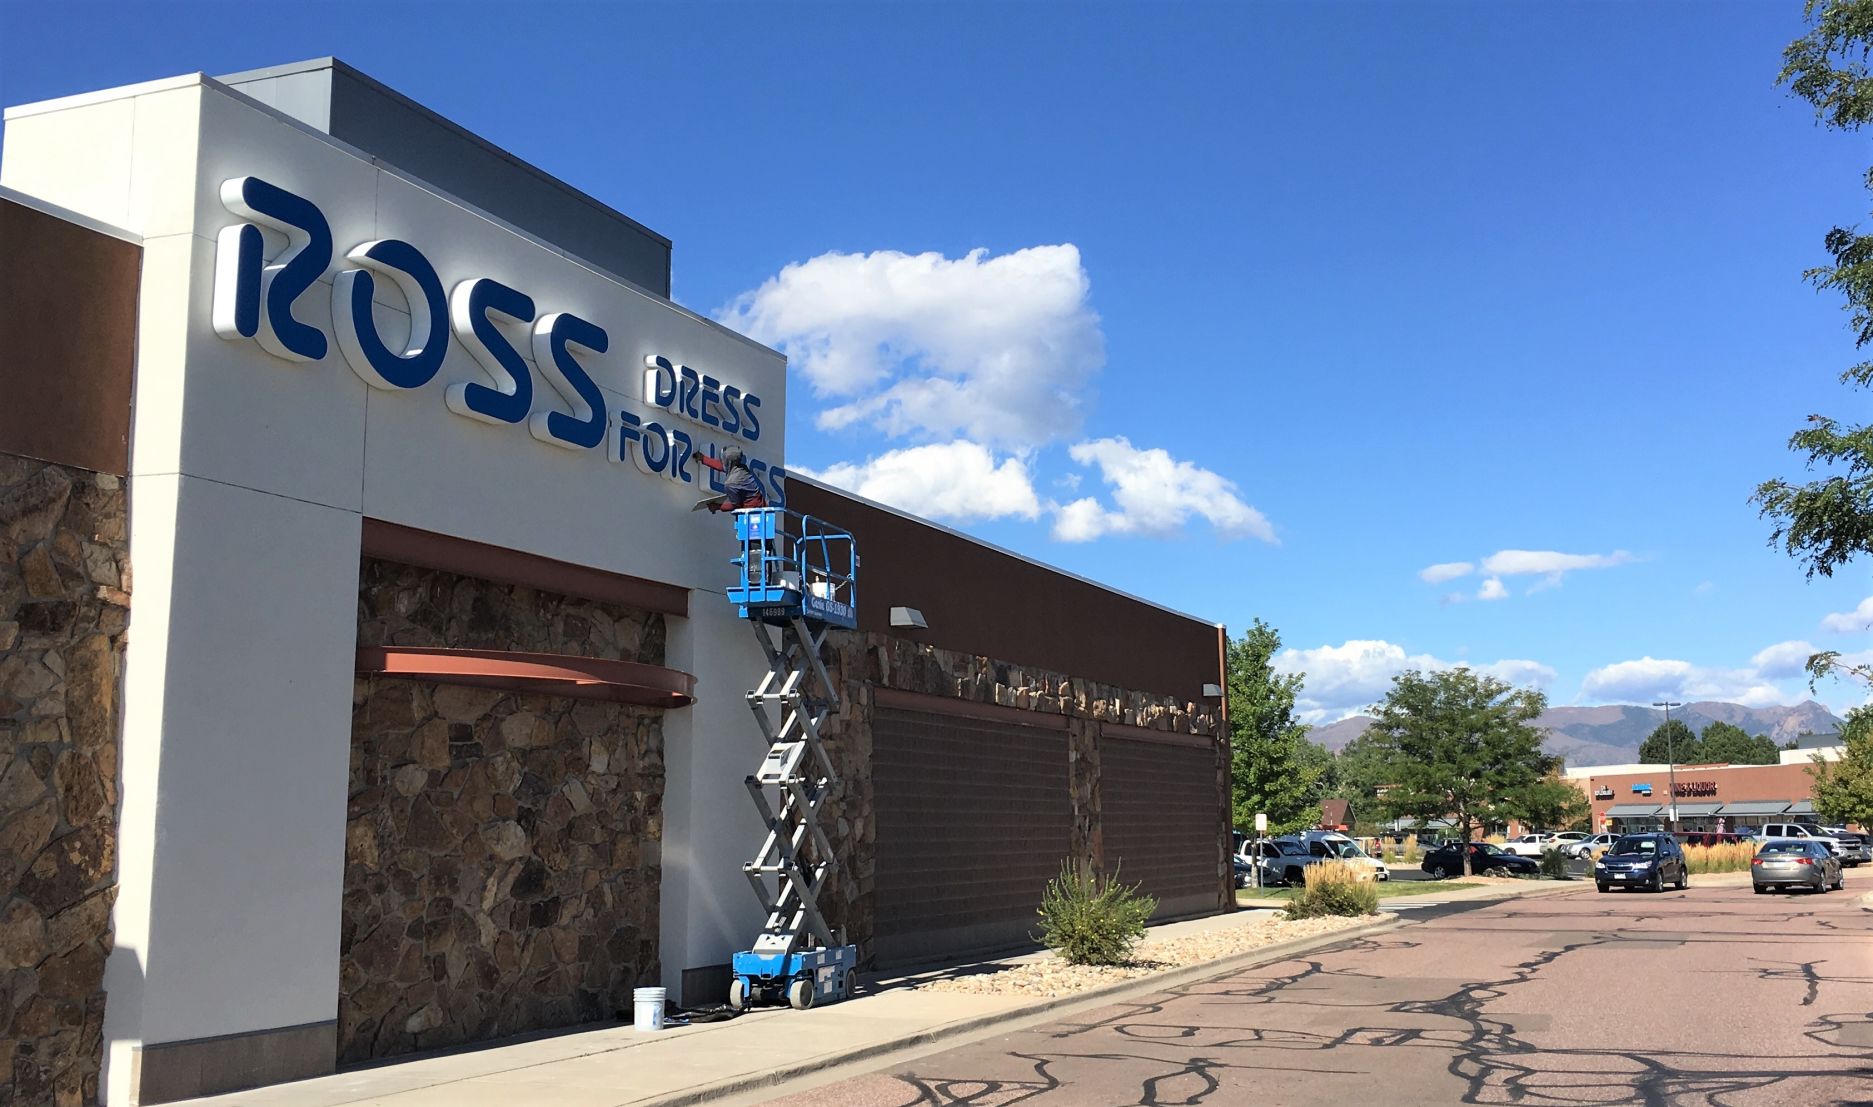 Ross Dress for Less plans new digs on 